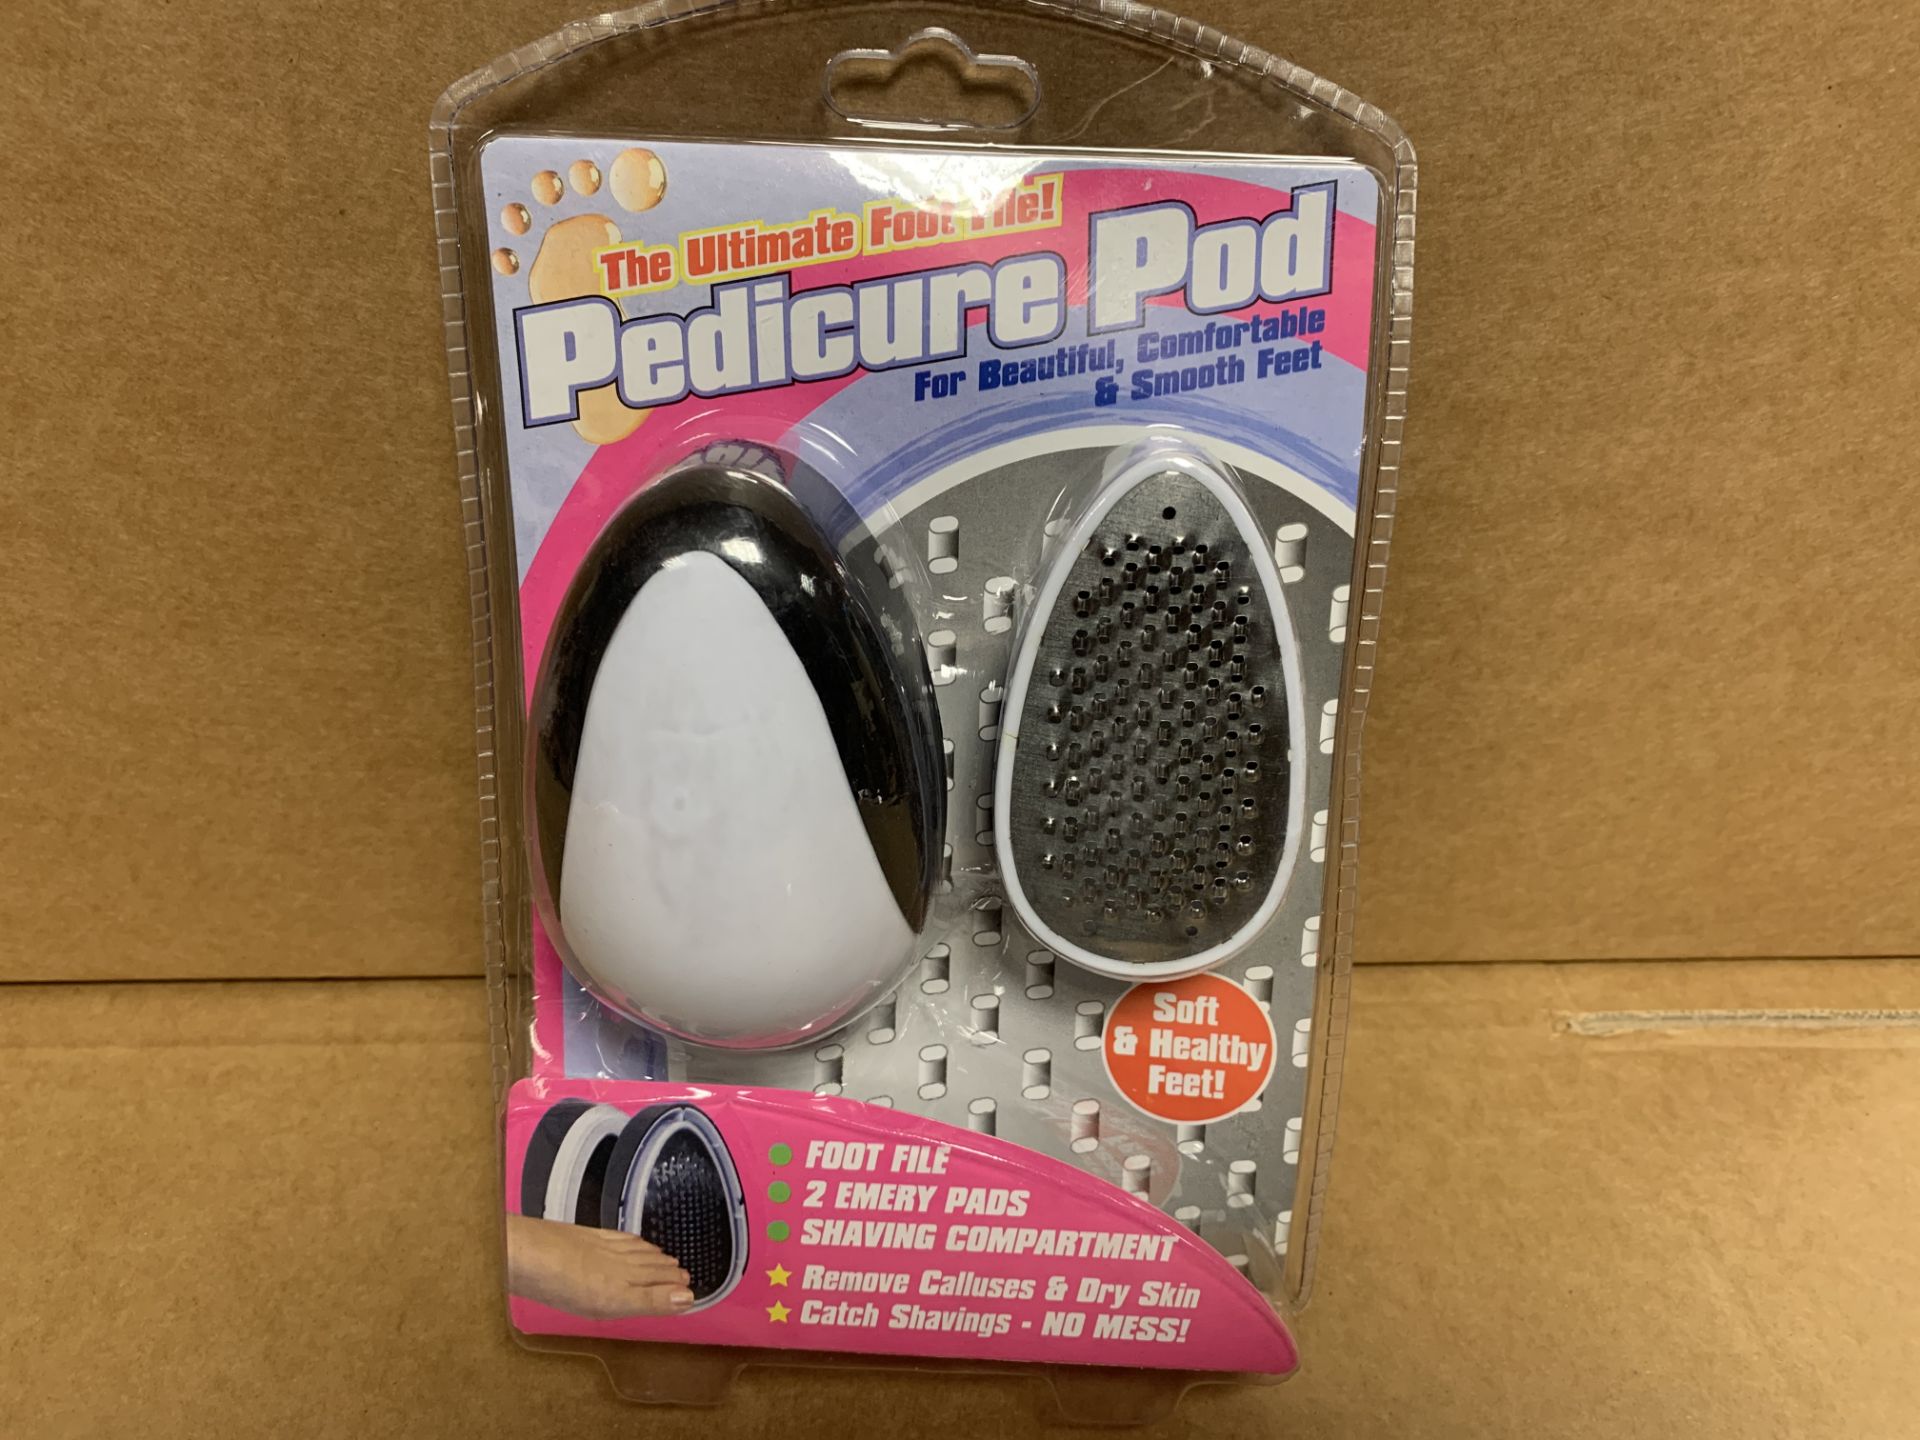 72 x NEW PACKAGED PEDICURE POD - THE ULTIMATE FOOT FILE. RRP £4.99 EACH